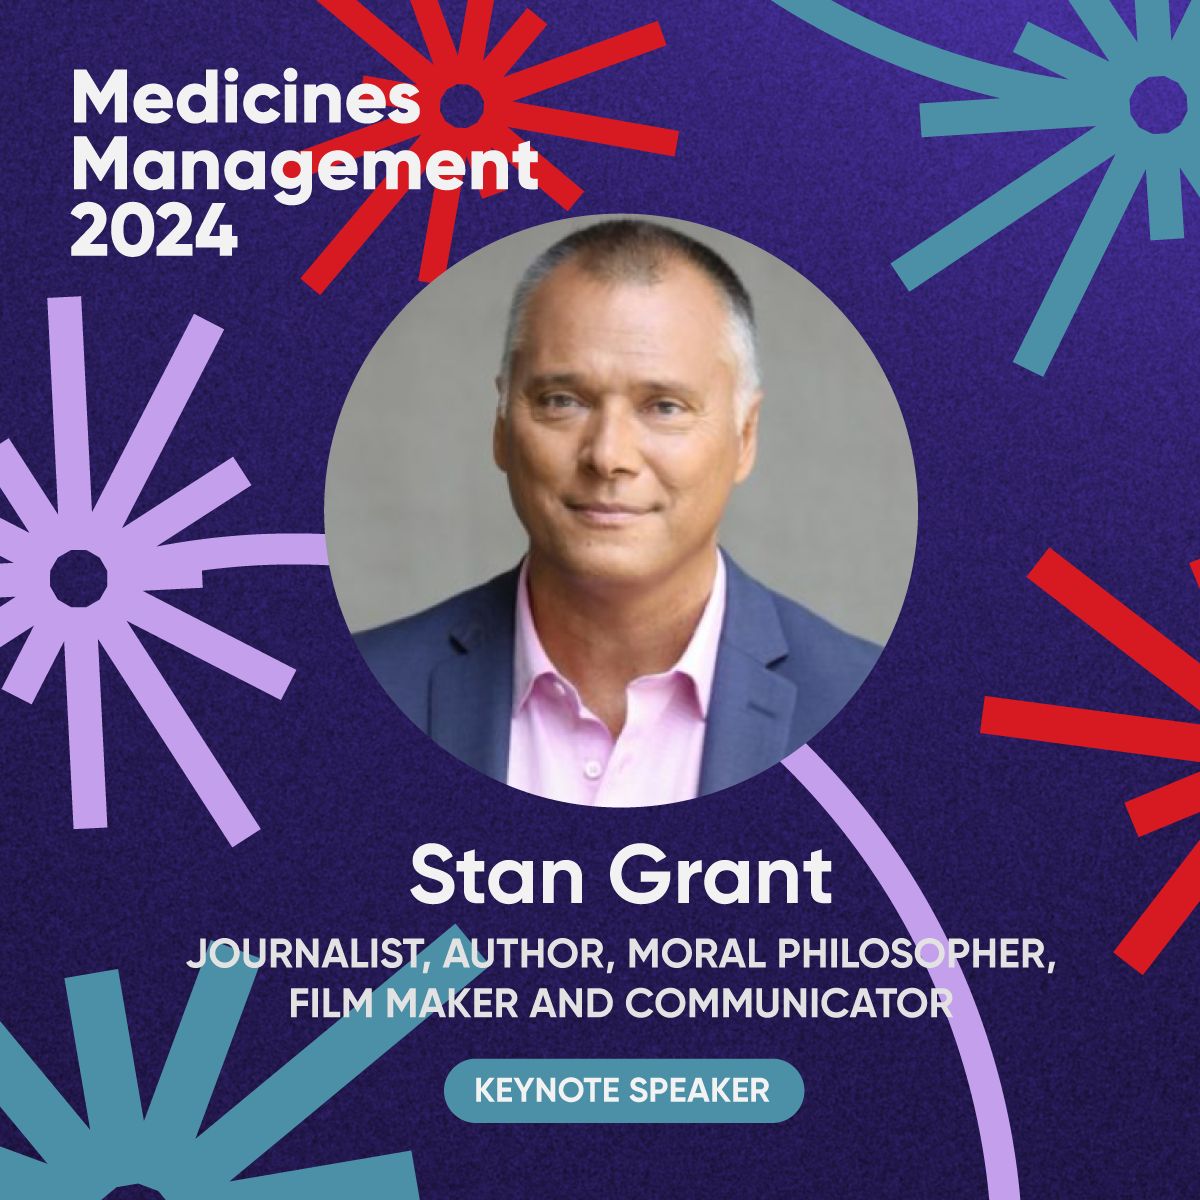 We are thrilled to announce renowned journalist, author, moral philosopher, thinker, filmmaker and communicator Stan Grant as the opening keynote speaker for Medicines Management (MM2024)! Learn more about Stan and our other speakers → buff.ly/3UJ60OV